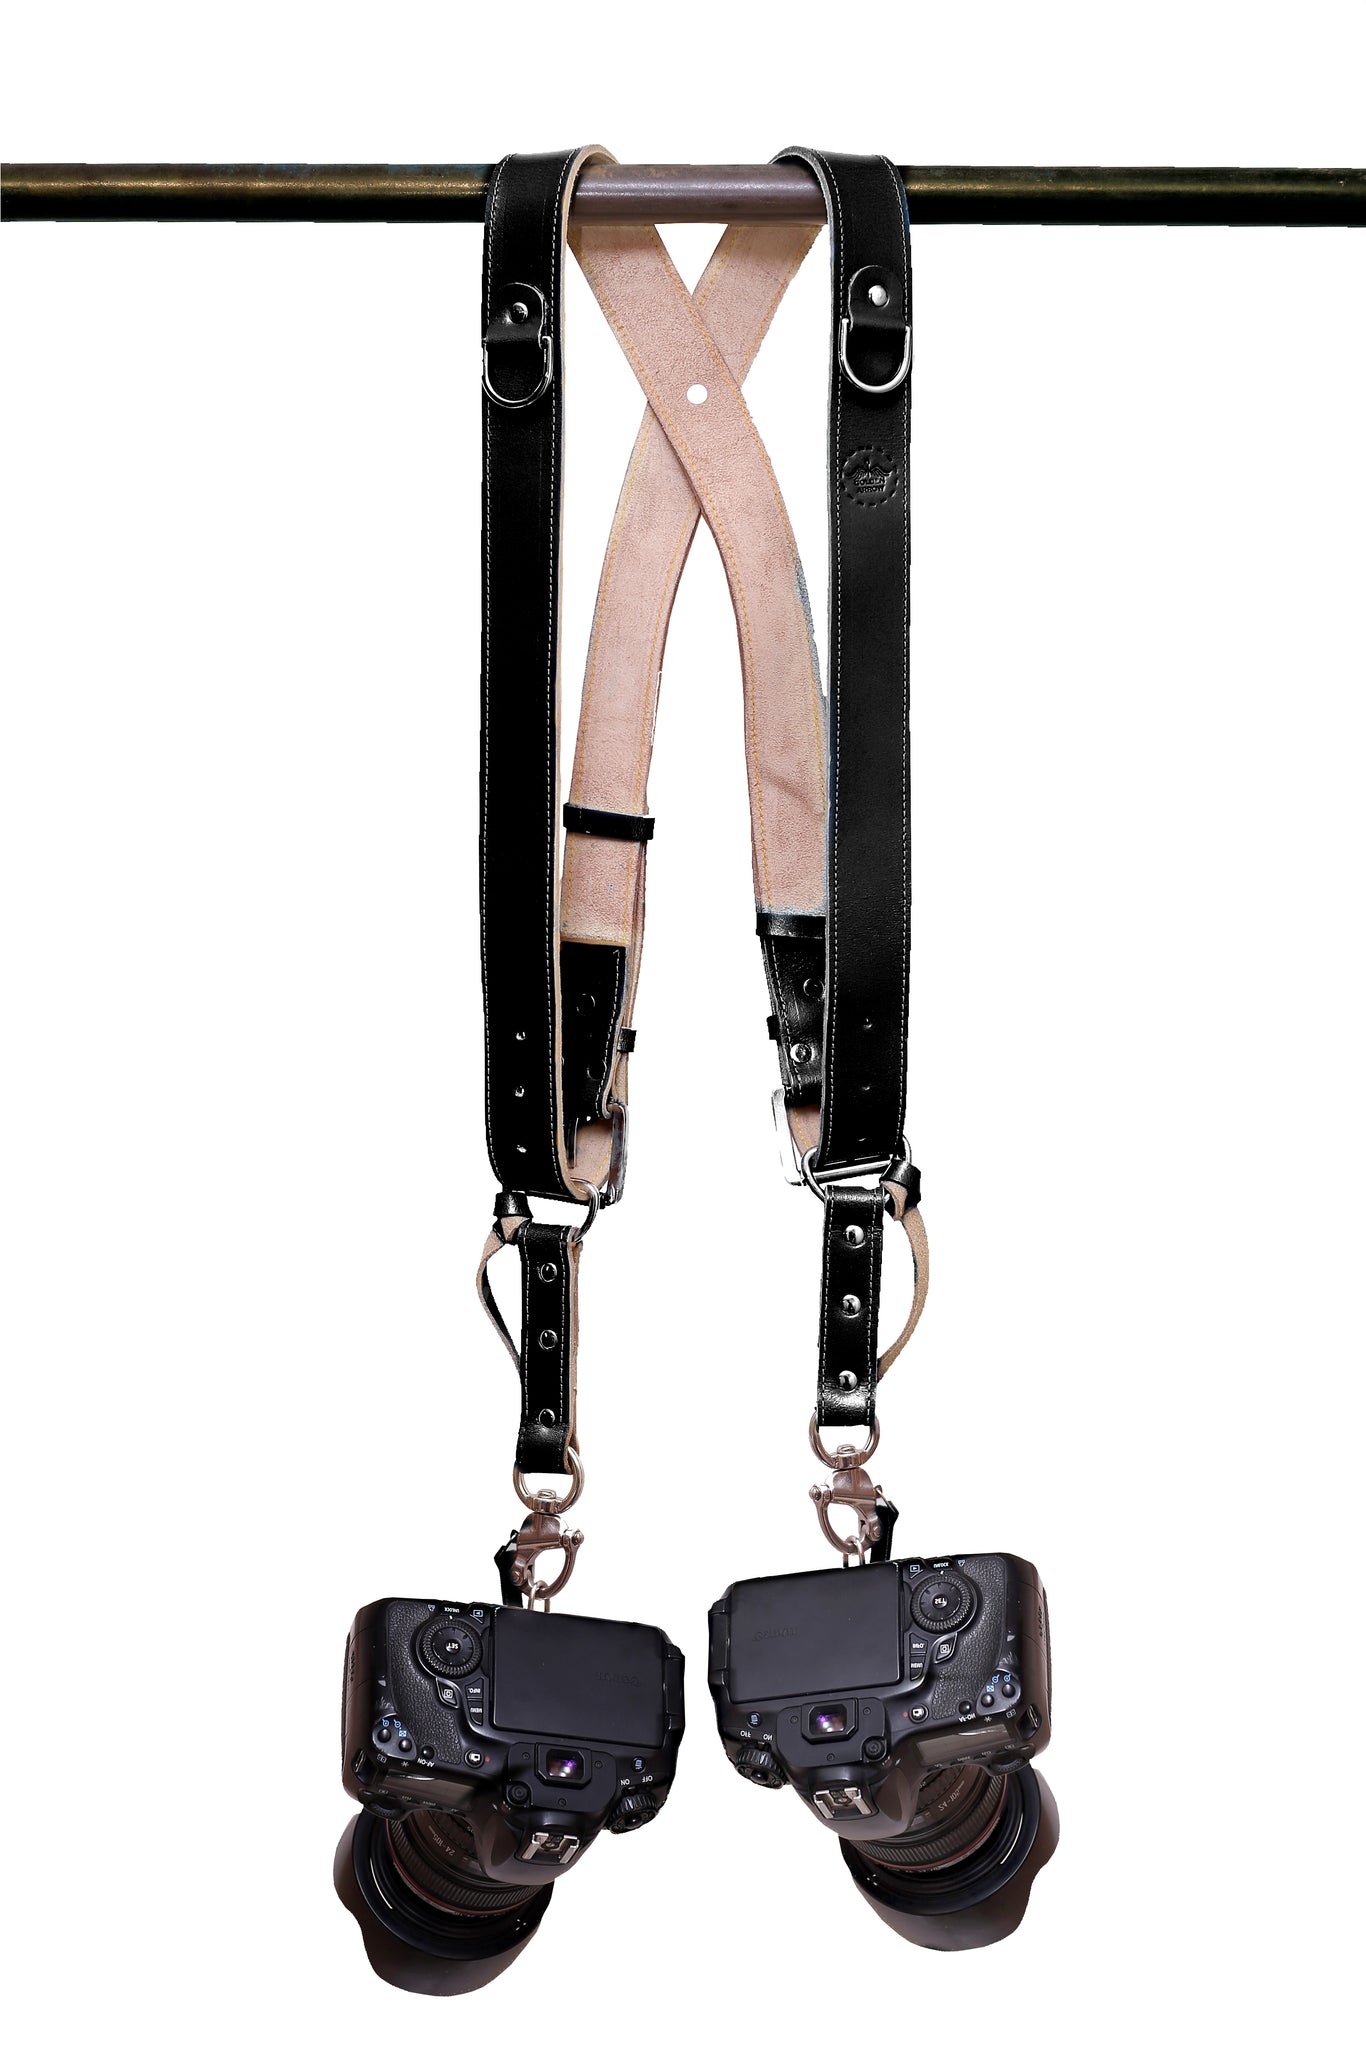 THE KNIGHT - Double Leather Camera Strap Belt Harness